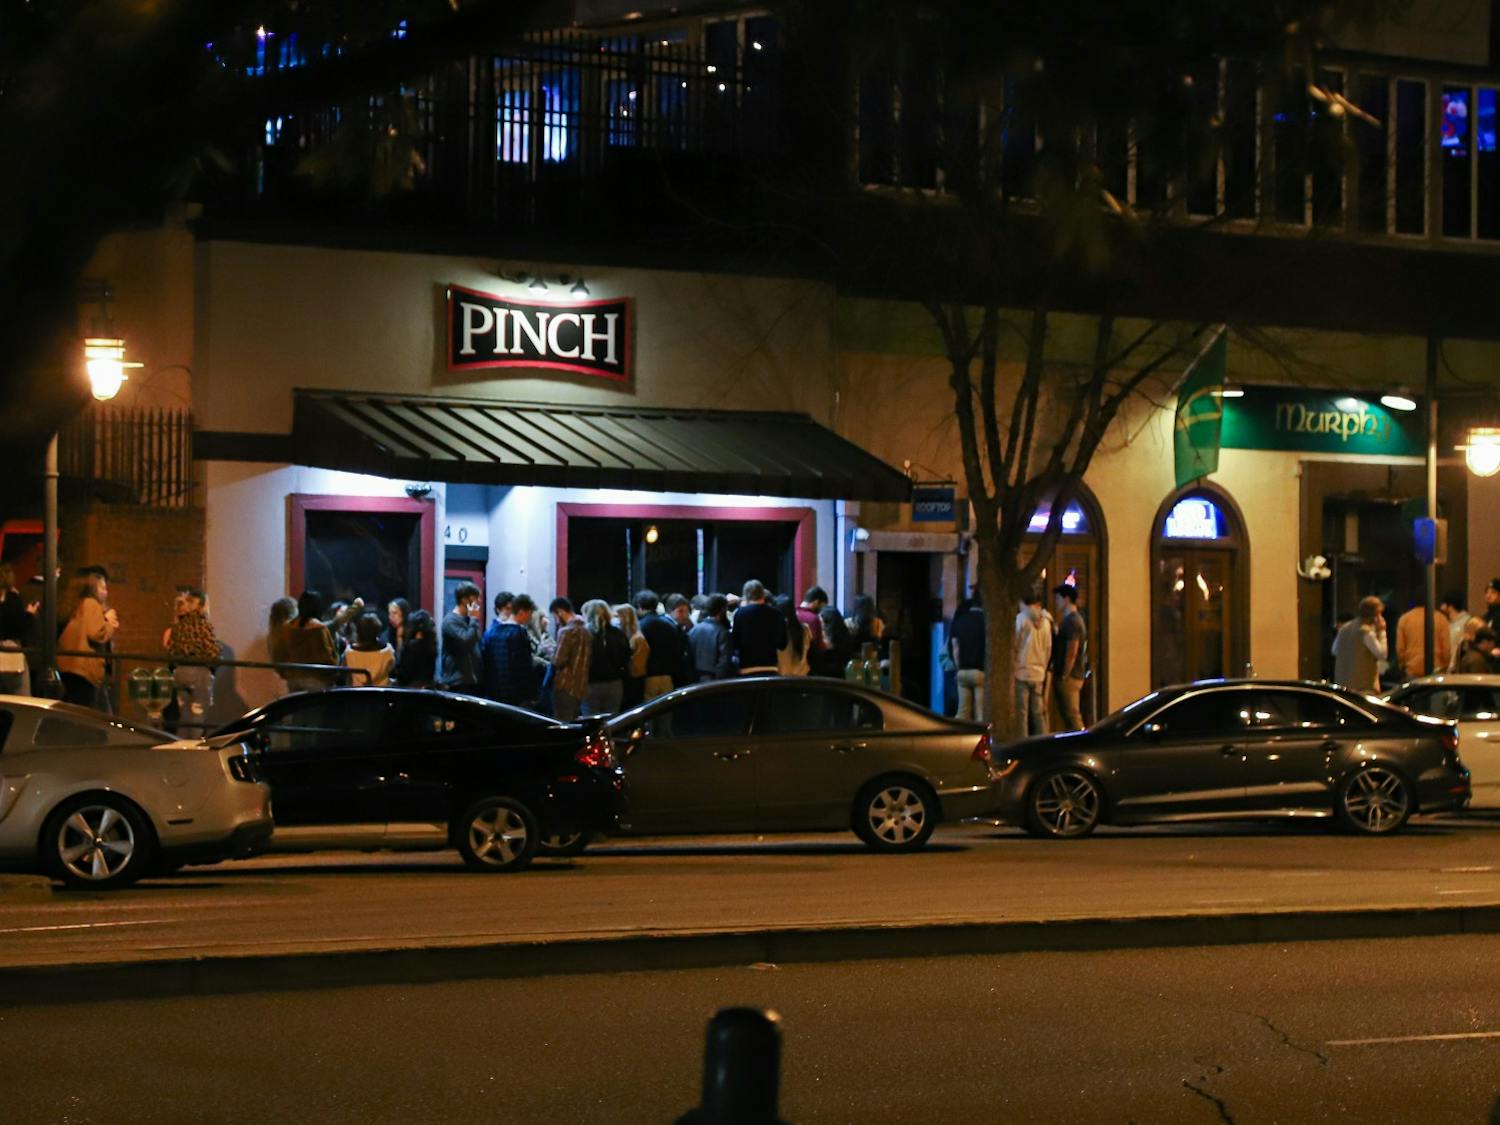 &nbsp;&nbsp;The popular bars Pinch, Rooftop and Murphey’s Law from the corner of Harden Street and Santee Avenue at 9:43 p.m. on Jan. 29, 2021.&nbsp;